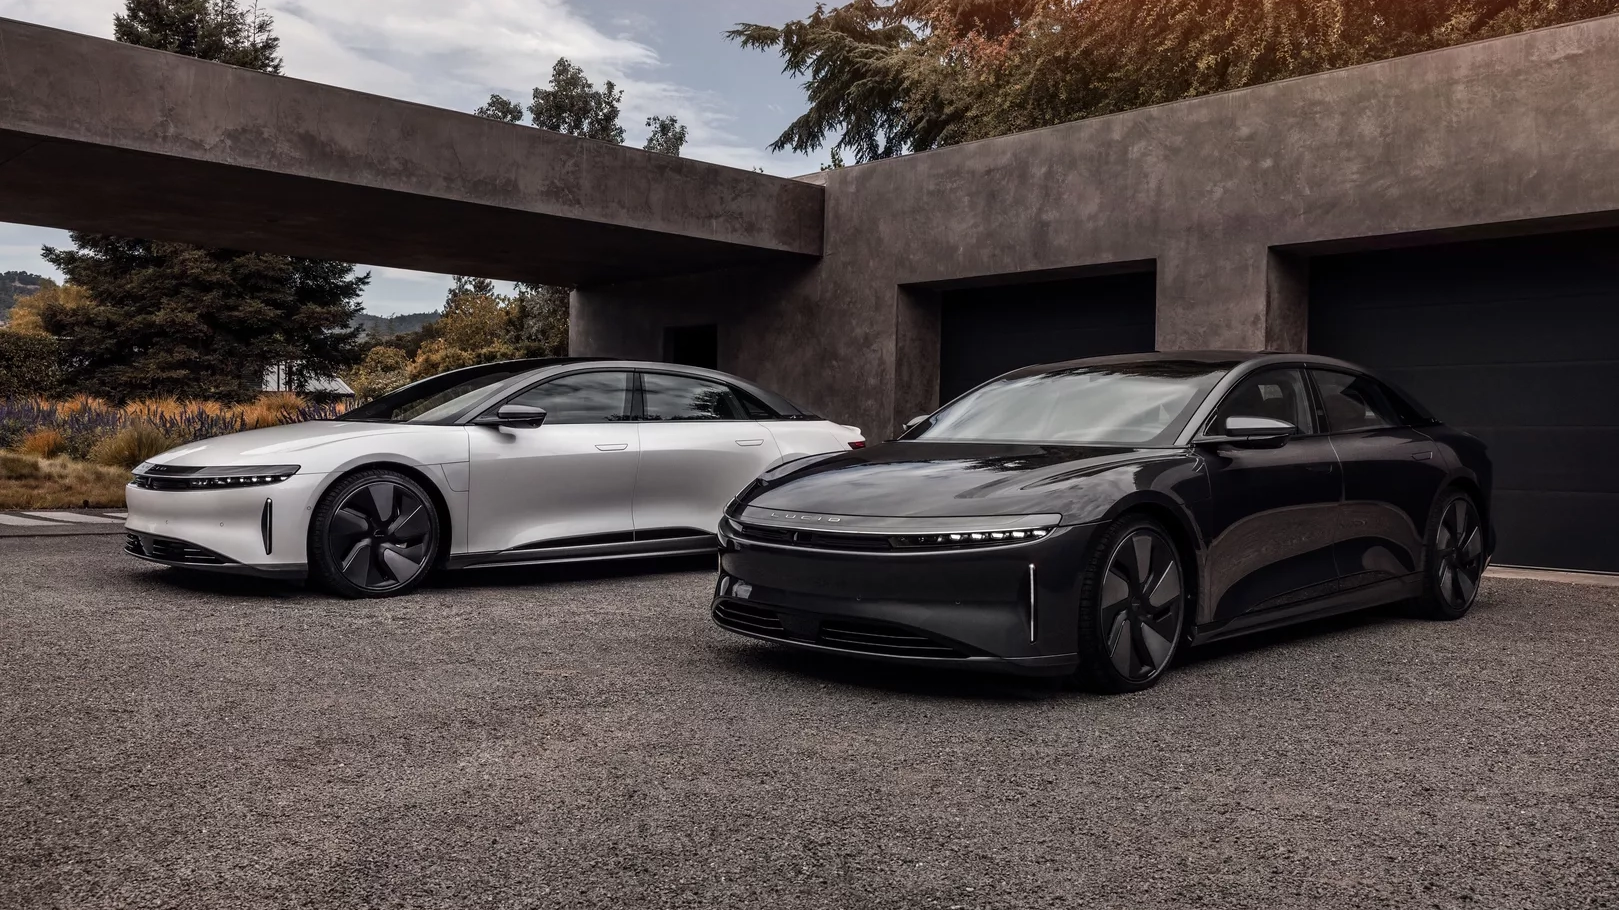 Lucid Air Now Offering Stealth Option For $6,000 In Q1 2023